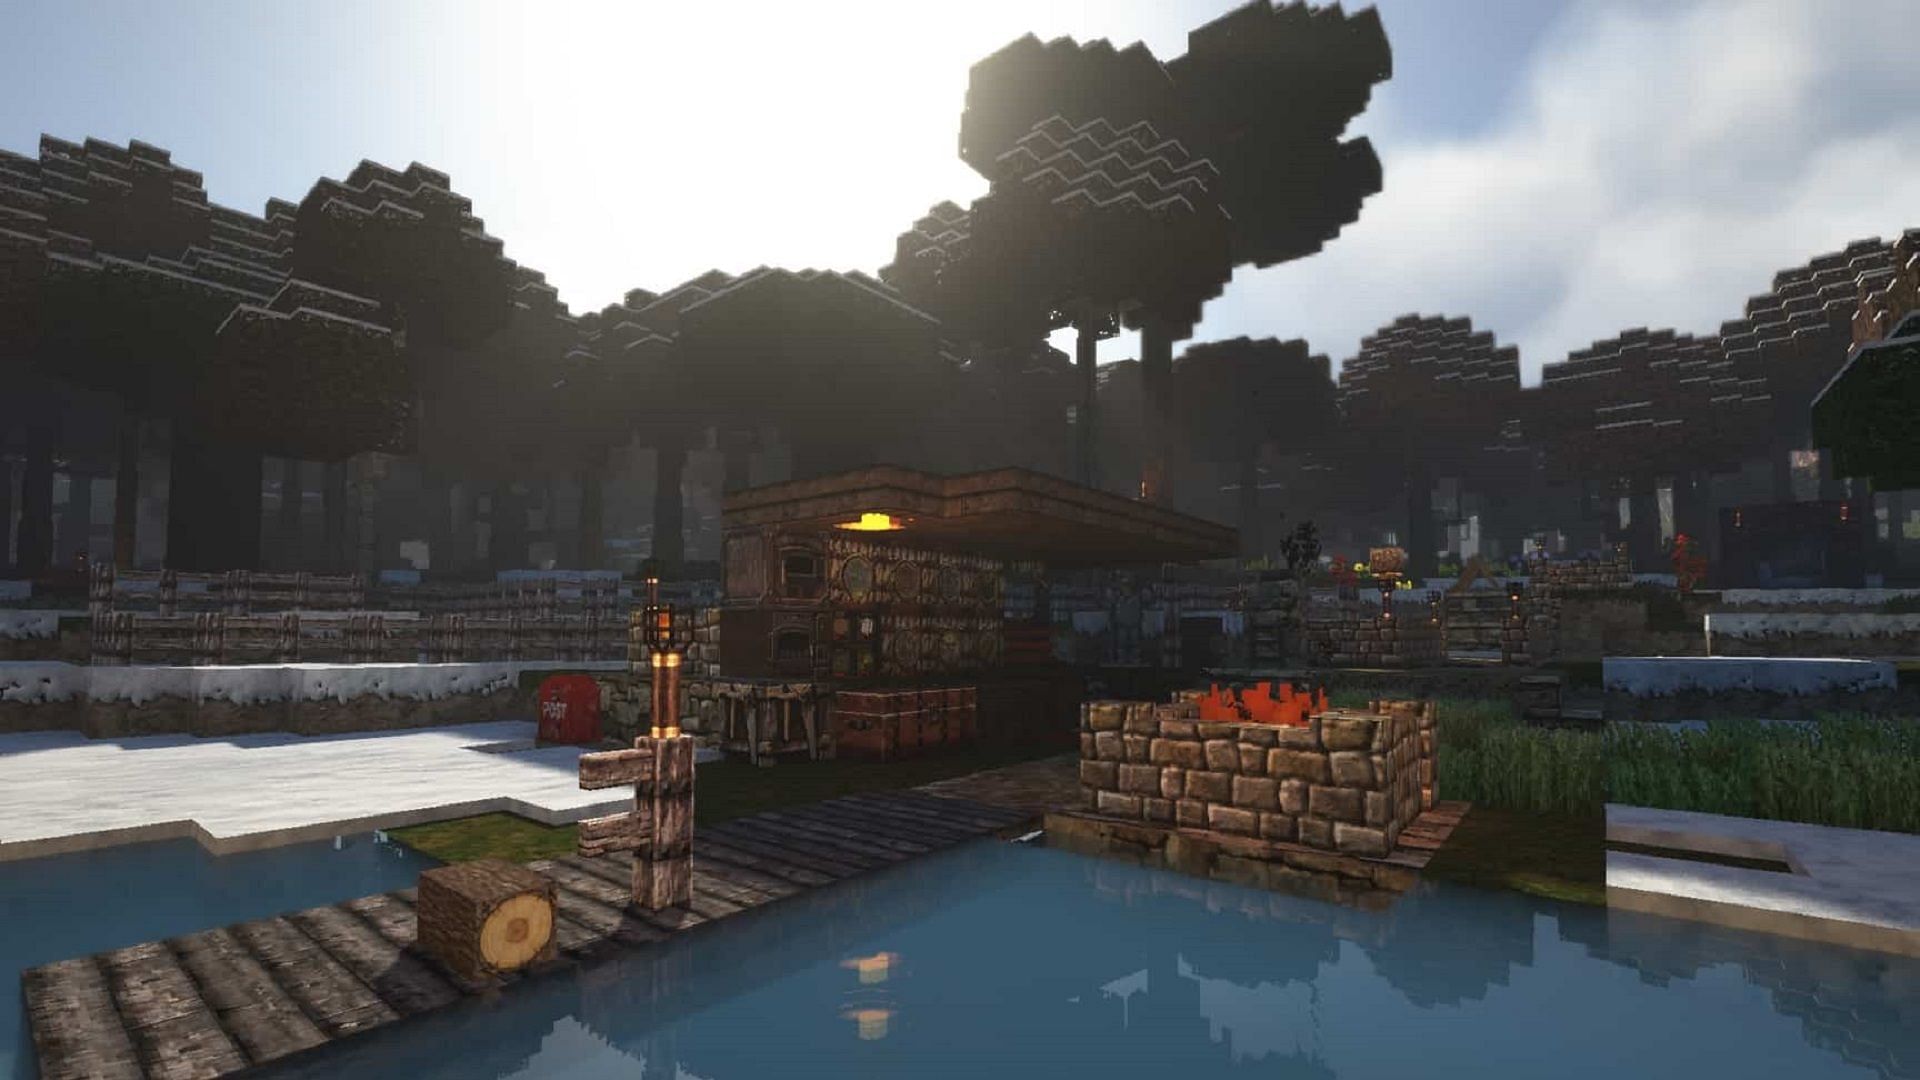 Battered Old Stuff can bring a perfect rustic aesthetic to Minecraft 1.12.2 (Image via Ozbillo/Resourcepack.net)